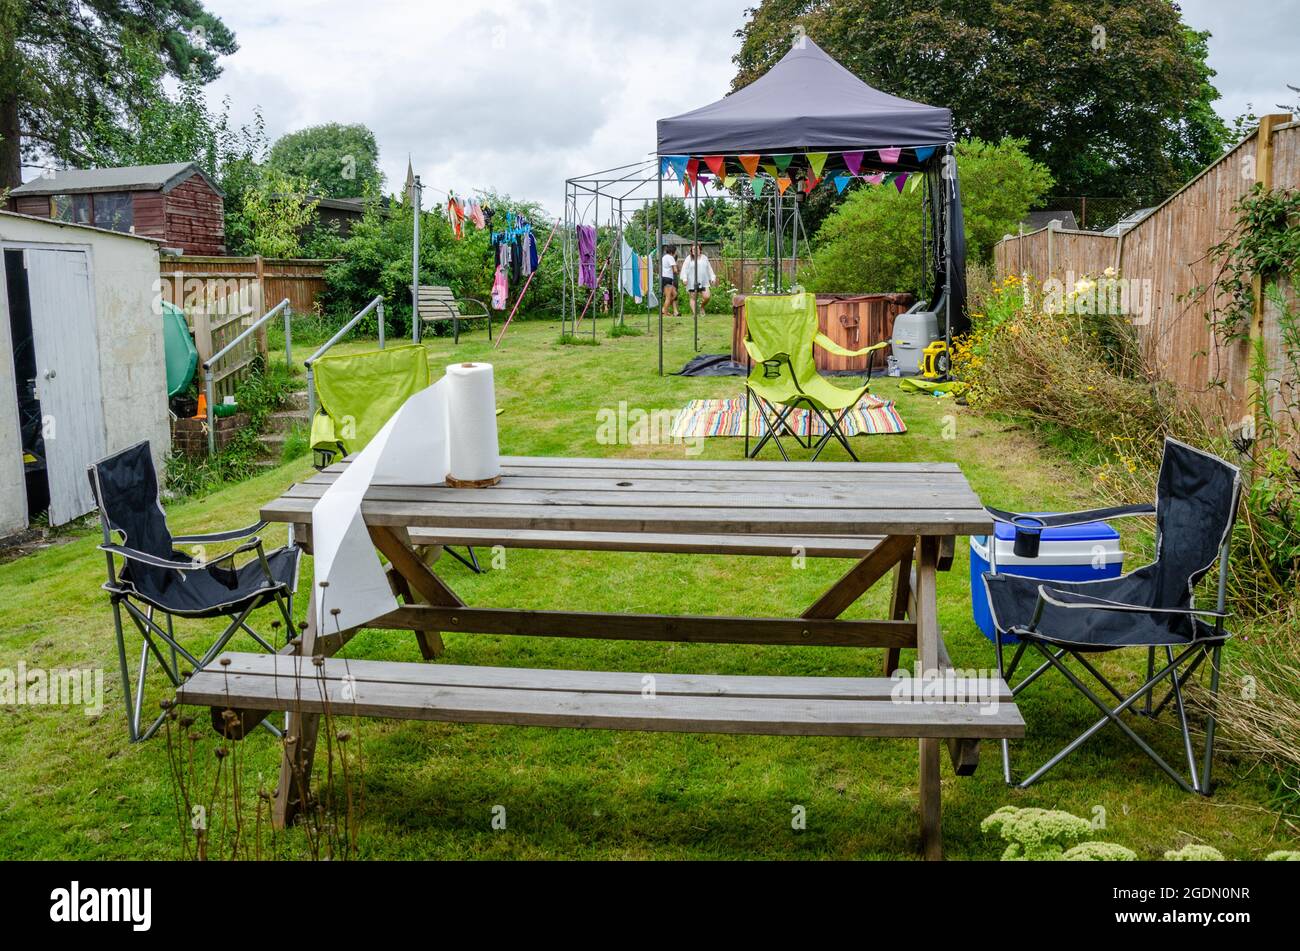 A garden set up for entertaining with a wooden table and bench set in the foregrounnd rented hot tub under a gazebo behind. Stock Photo